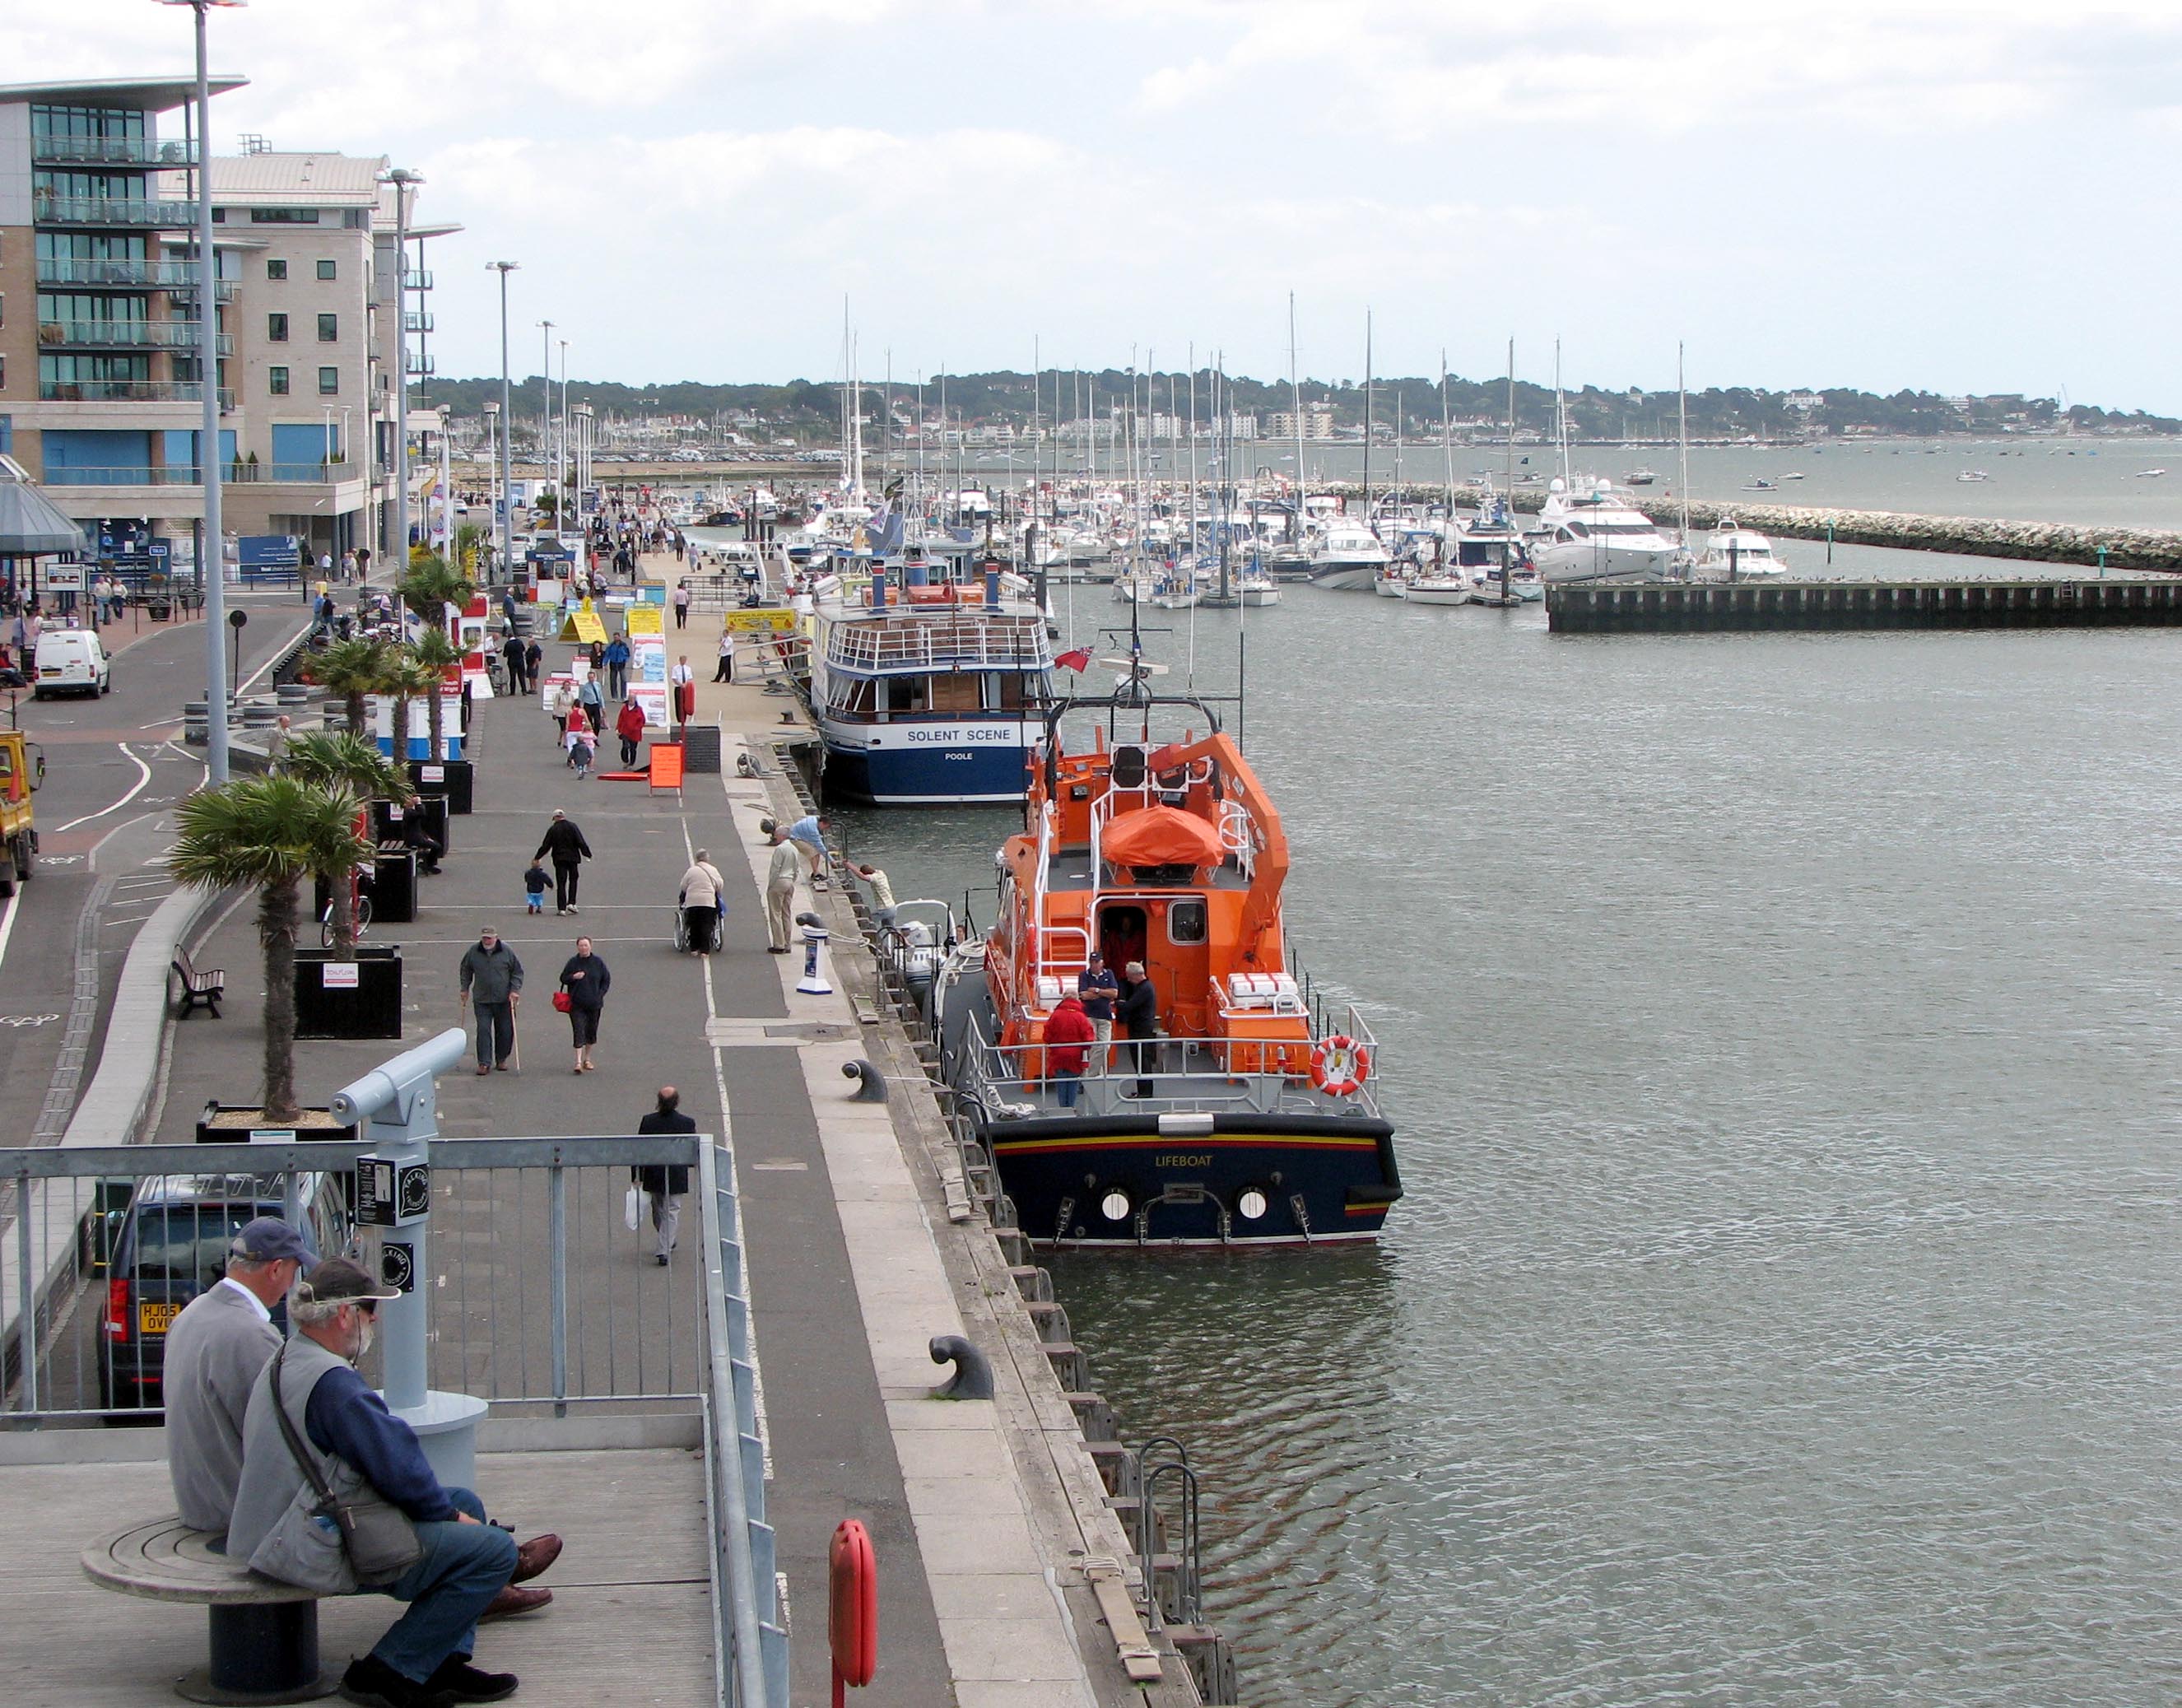 File:The.quay.at.poole.arp.jpg - Wikimedia Commons